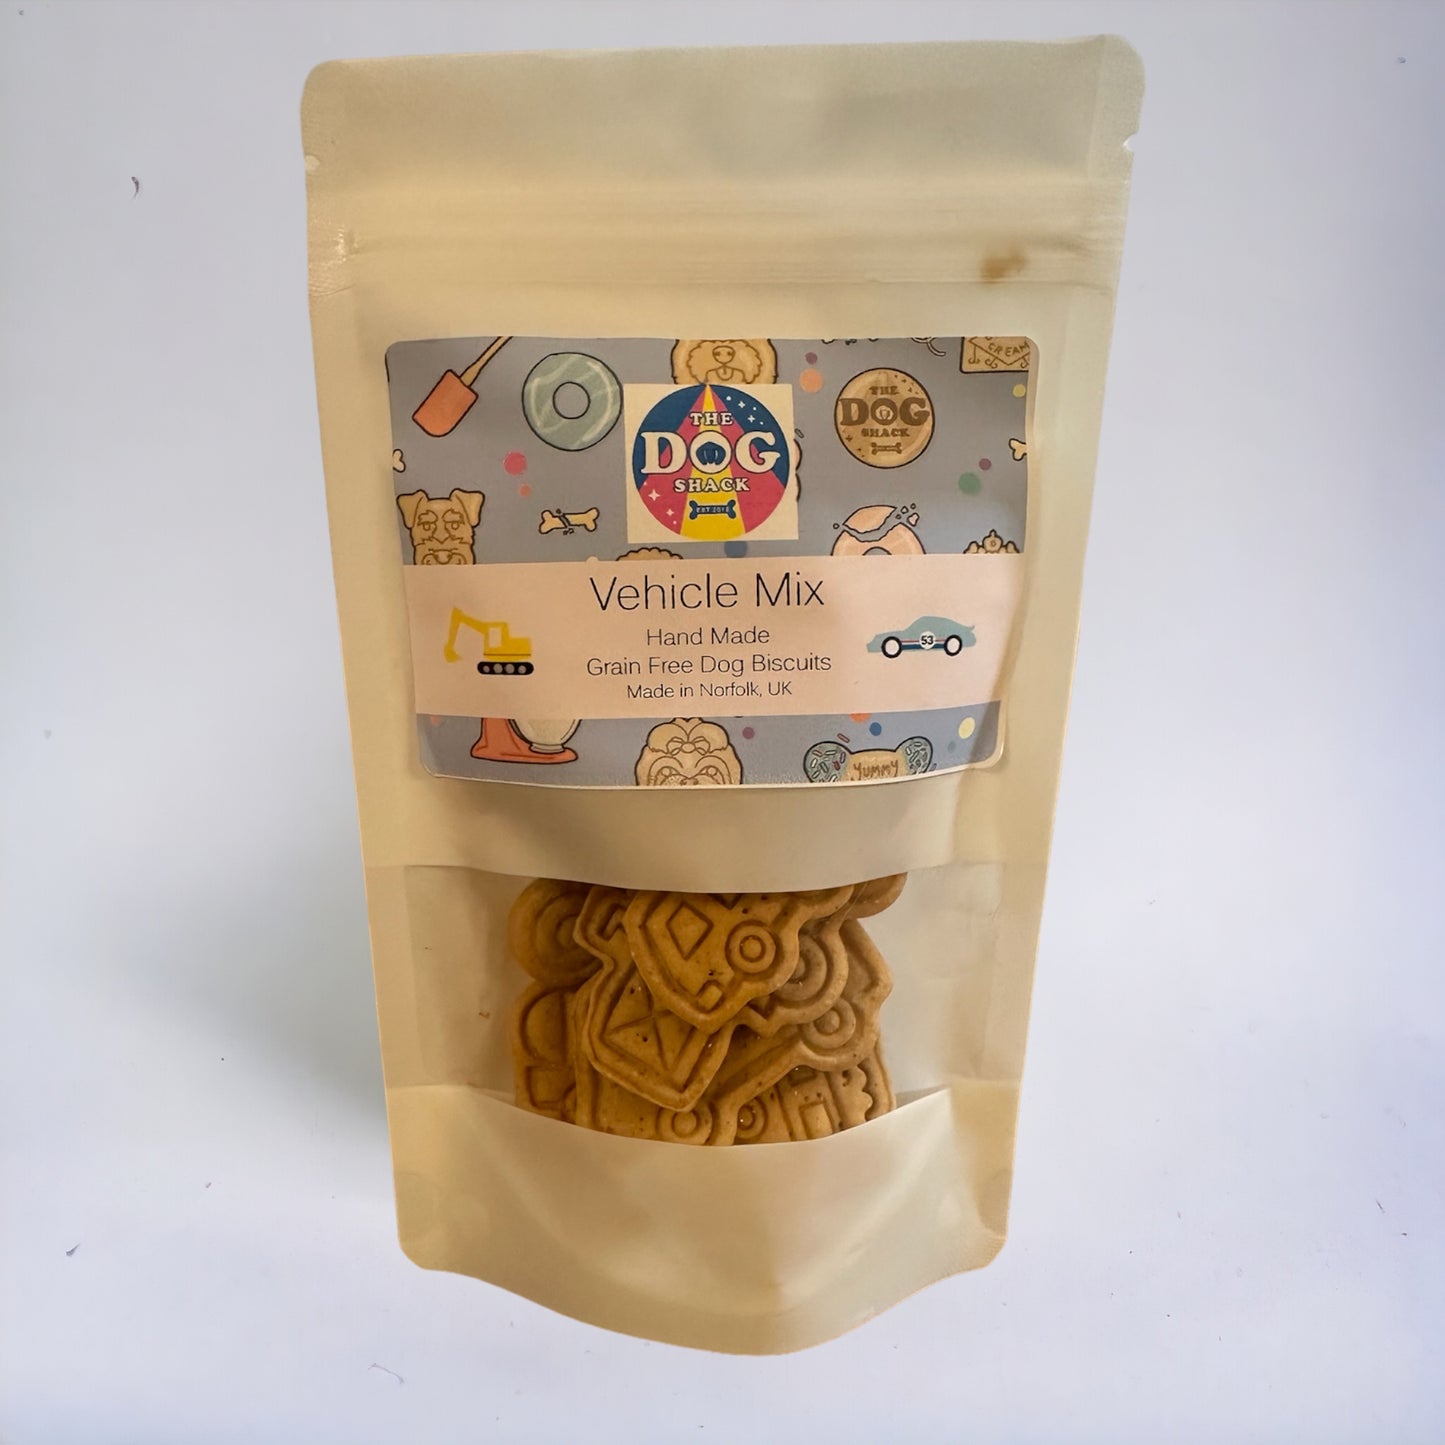 Dog Bakery Vehicles Mix Grain Free Dog Biscuits Wholesale